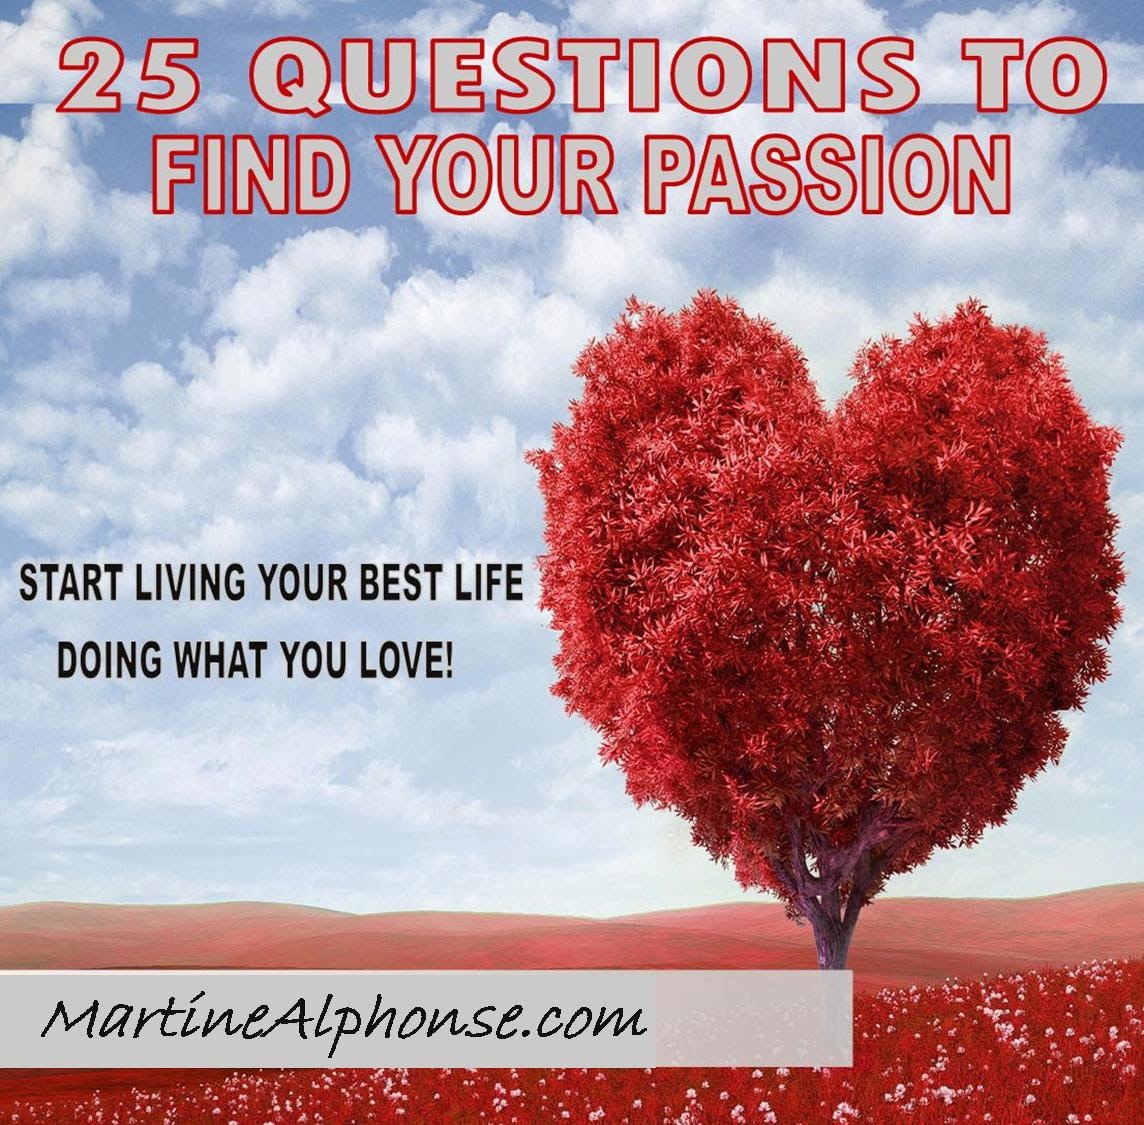 DISCOVER YOUR TRUE PASSION